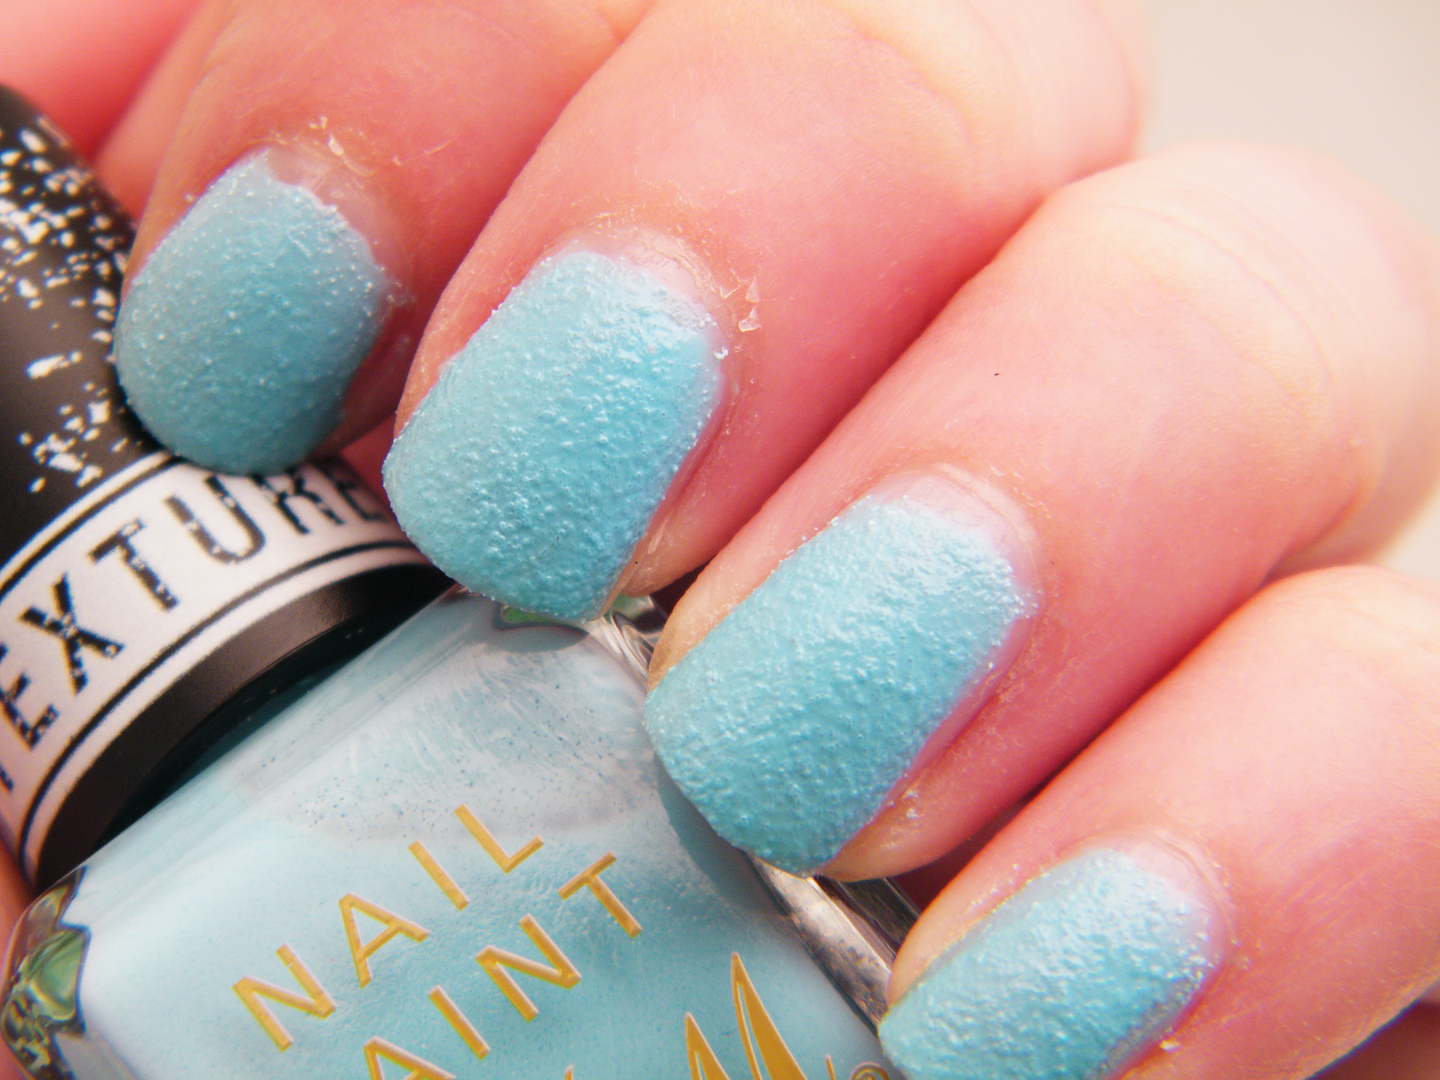 Barry M Texture Effect Nail Polish in Atlantic Road